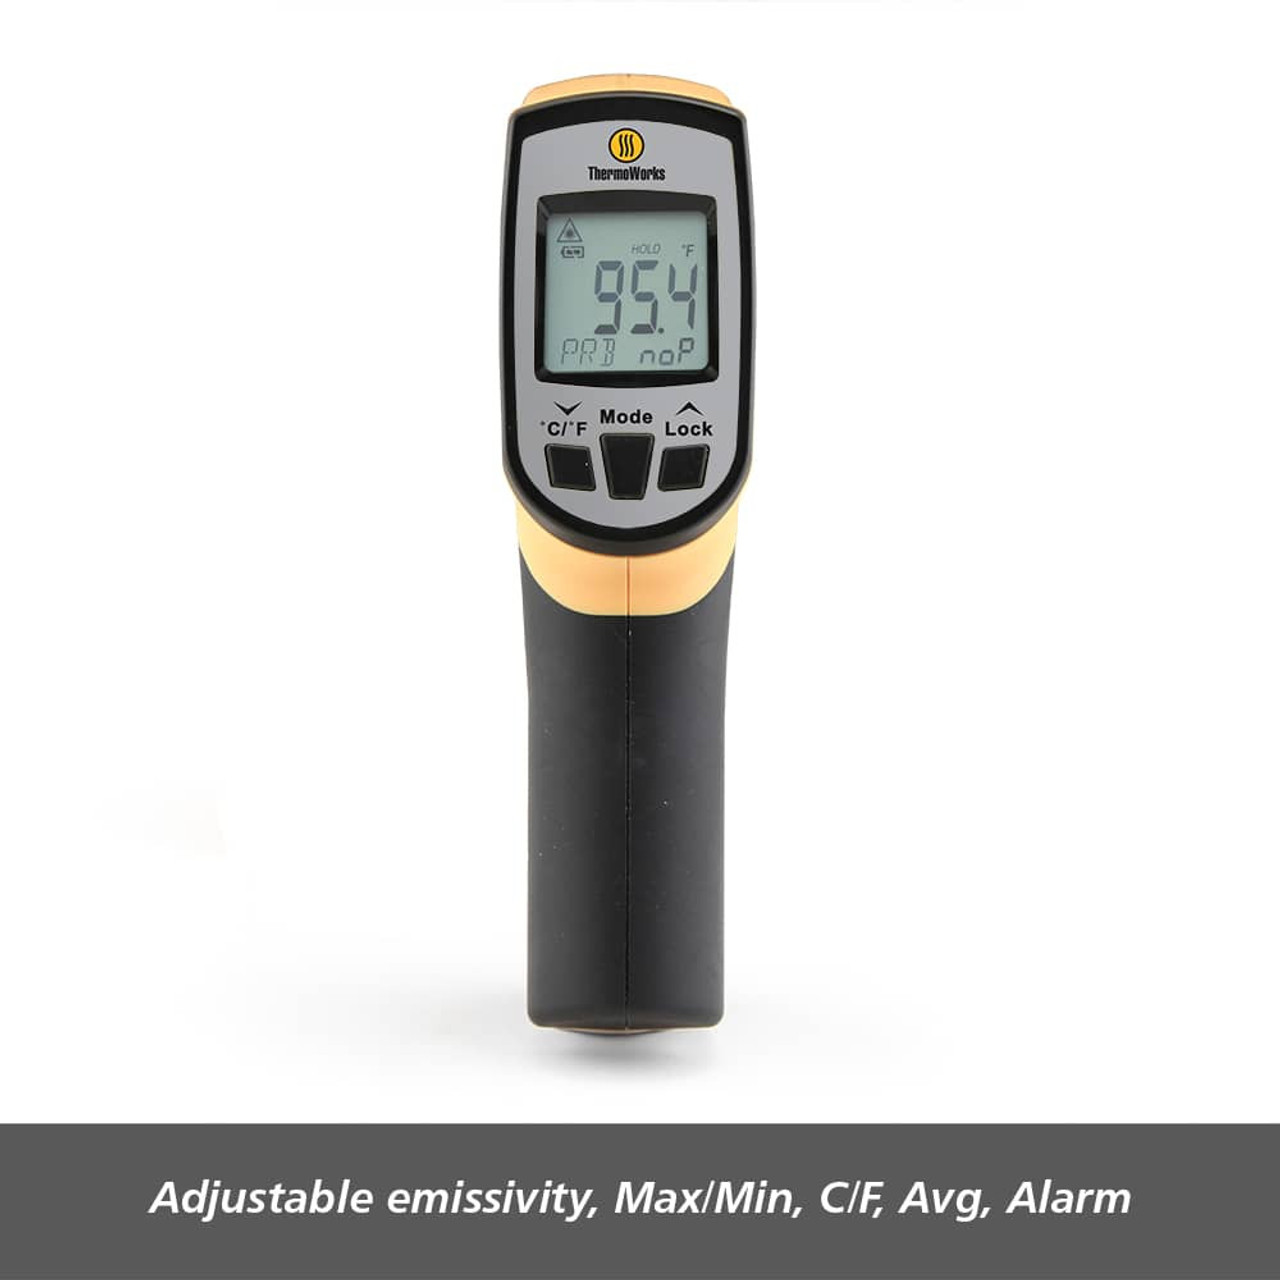 Infrared Thermometer - Digital Laser - Pro Line - (Thermoform Molding)